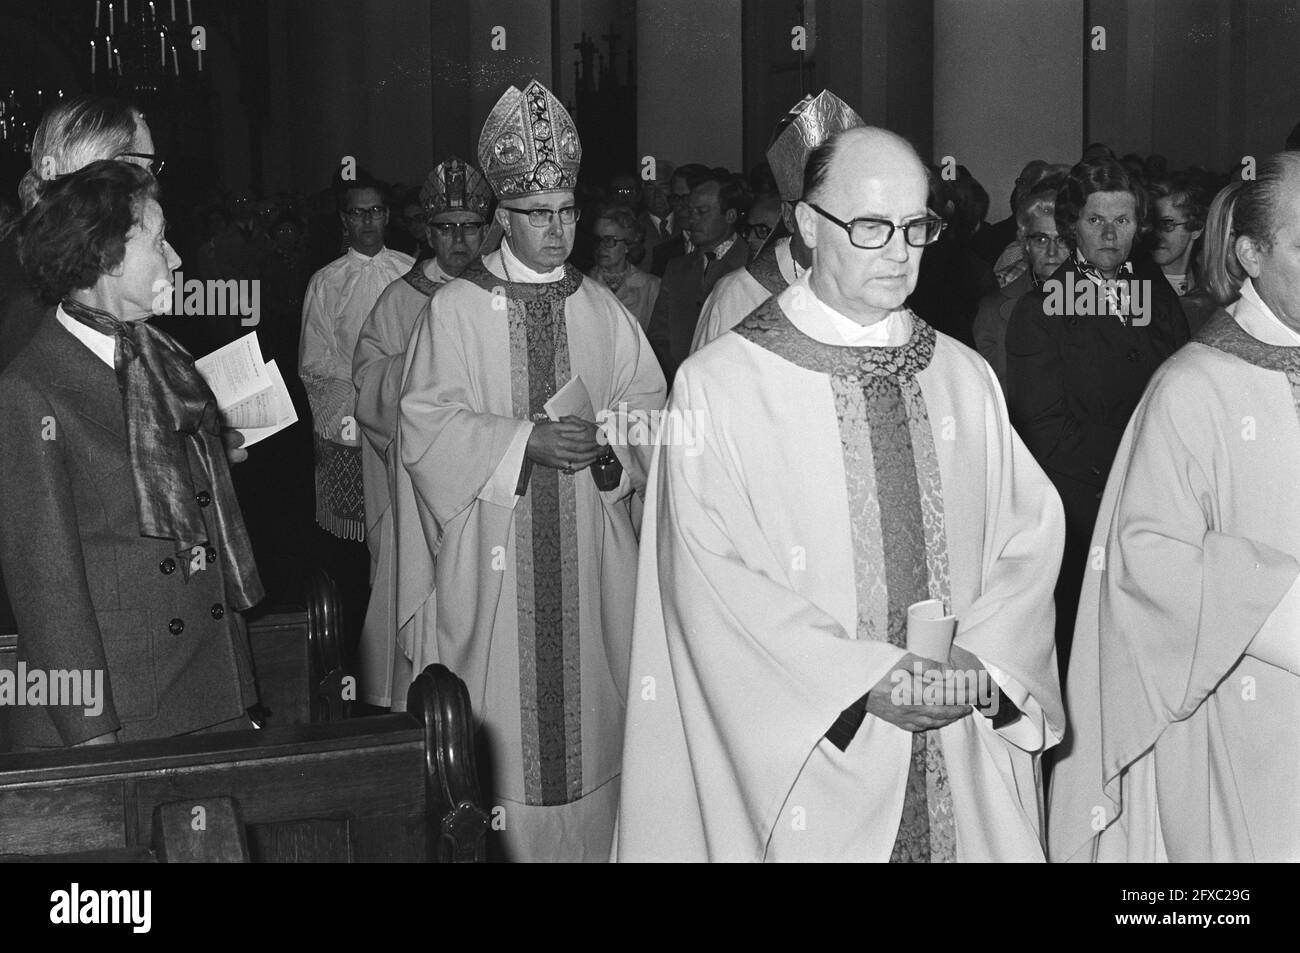 Jubilee and farewell of Cardinal Alfrink during Eucharist Celebration in Utrecht, Cardinal Alfrink speaking, 28 May 1976, FAREwell, cardinals, The Netherlands, 20th century press agency photo, news to remember, documentary, historic photography 1945-1990, visual stories, human history of the Twentieth Century, capturing moments in time Stock Photo